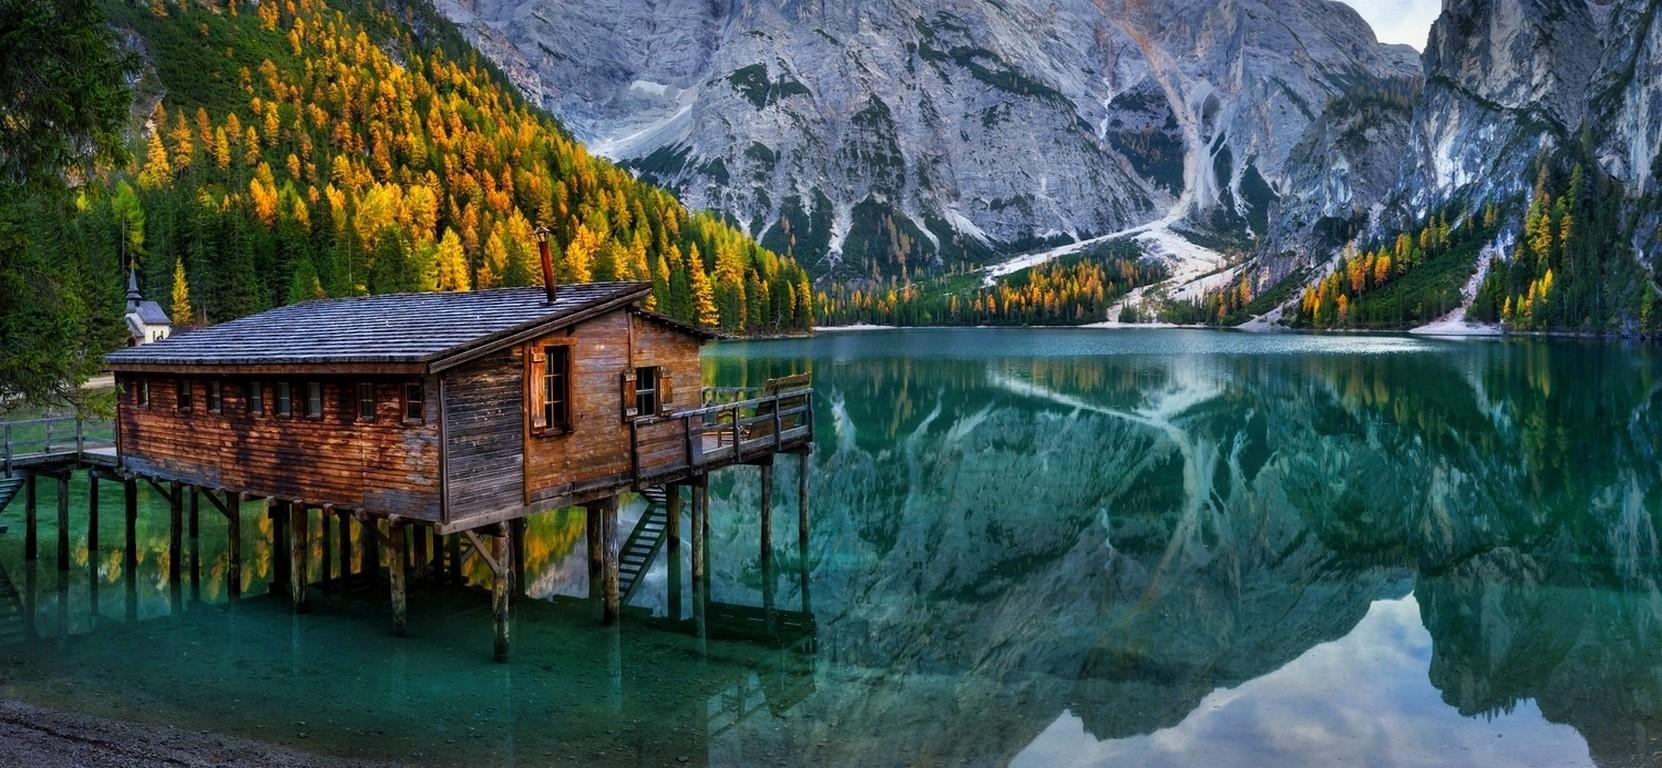 nature, Landscape, Lake, Mountain, Cabin, Chapel, Forest, Fall